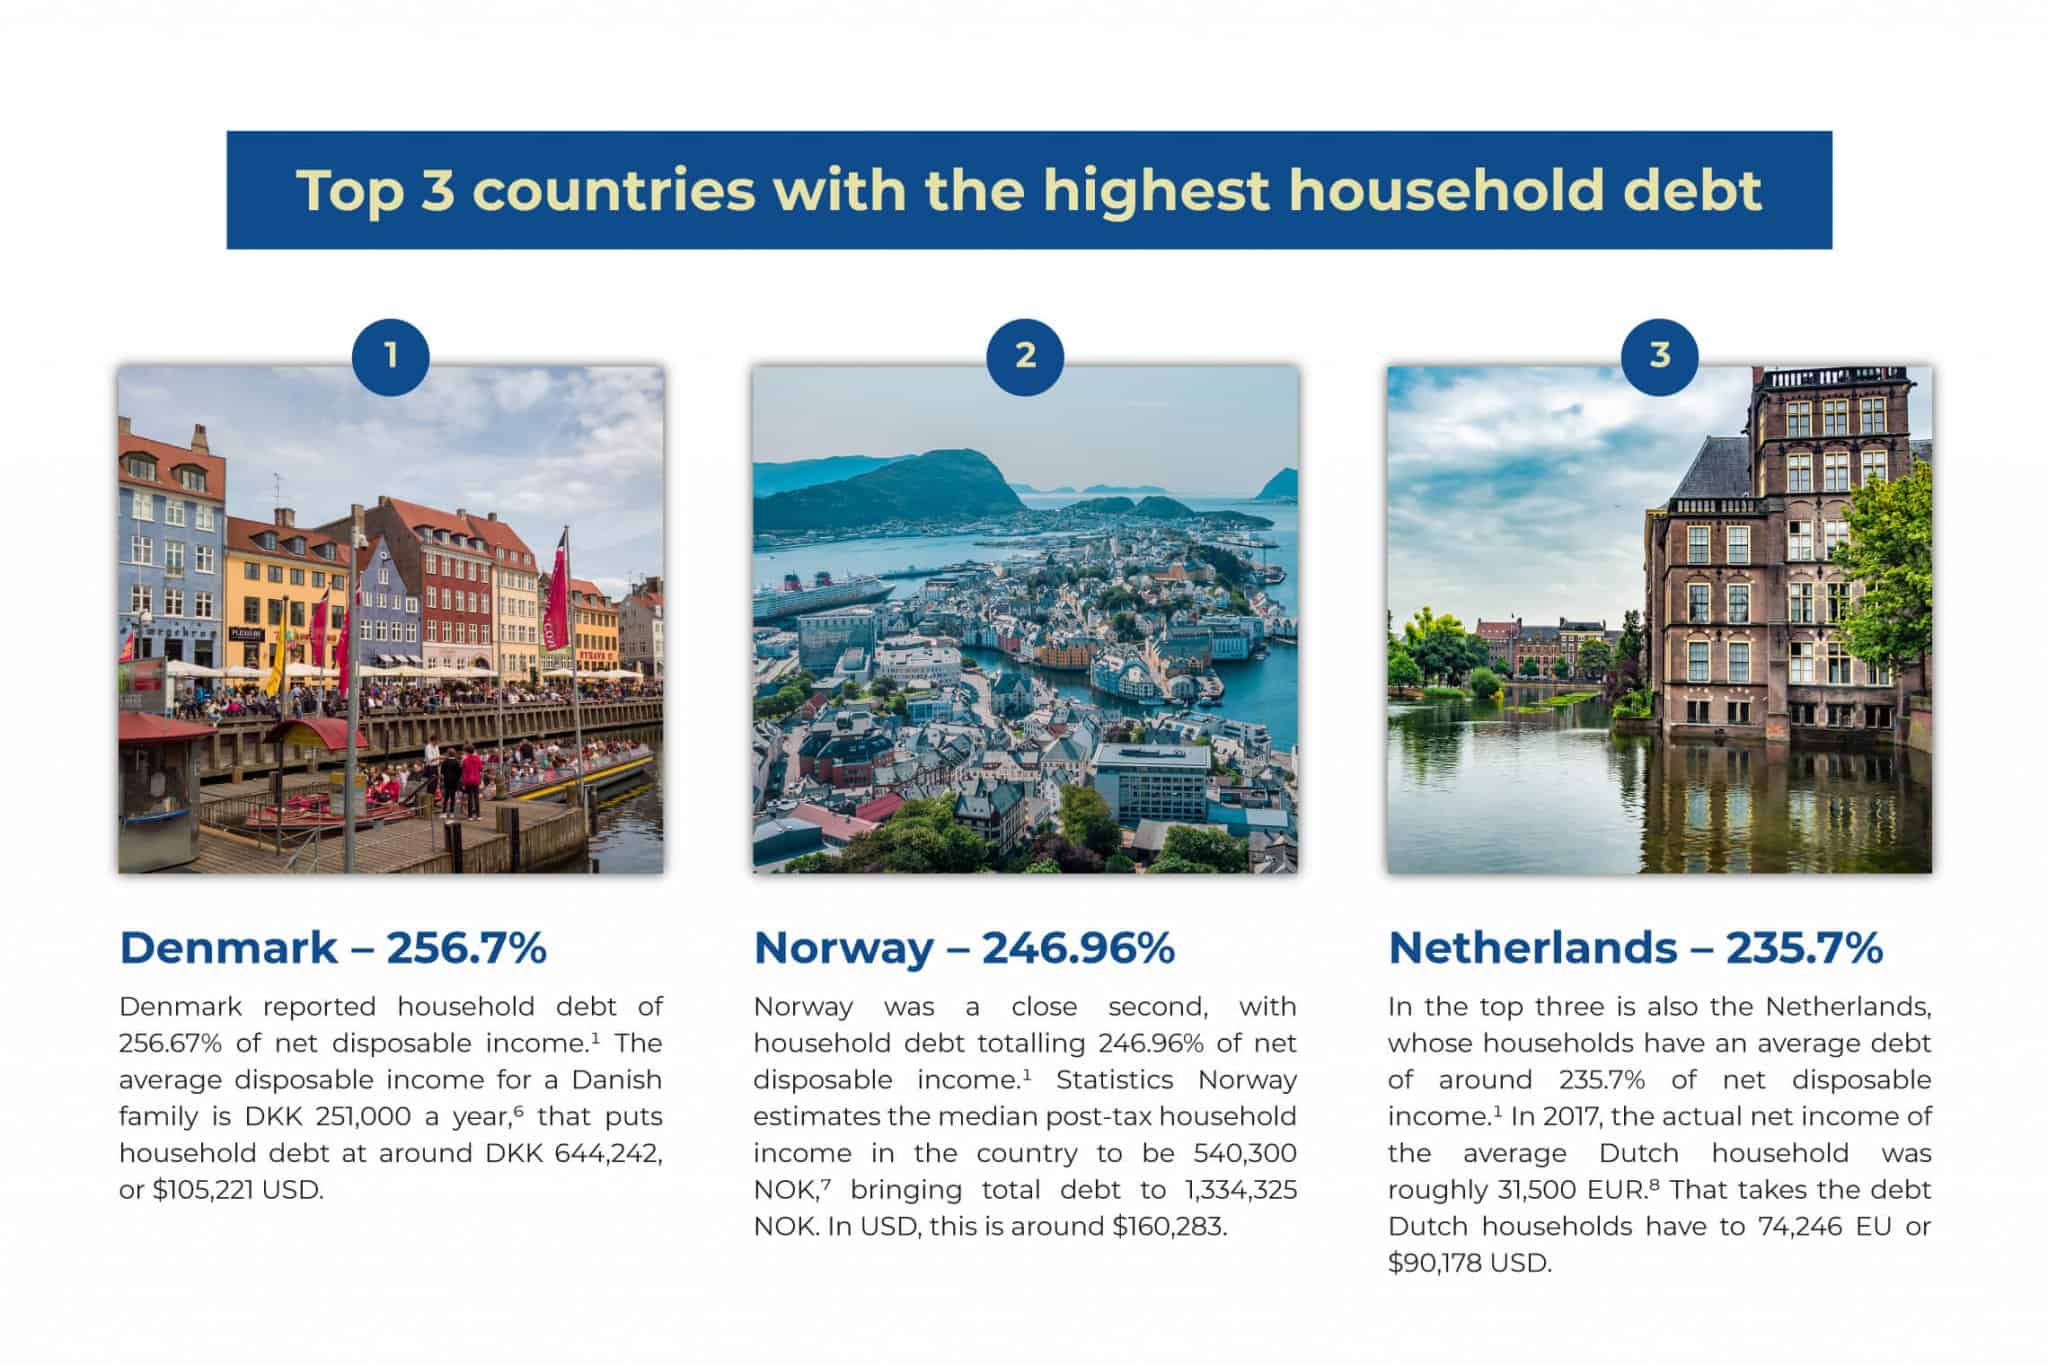 Top 3 countries with the highest household debt